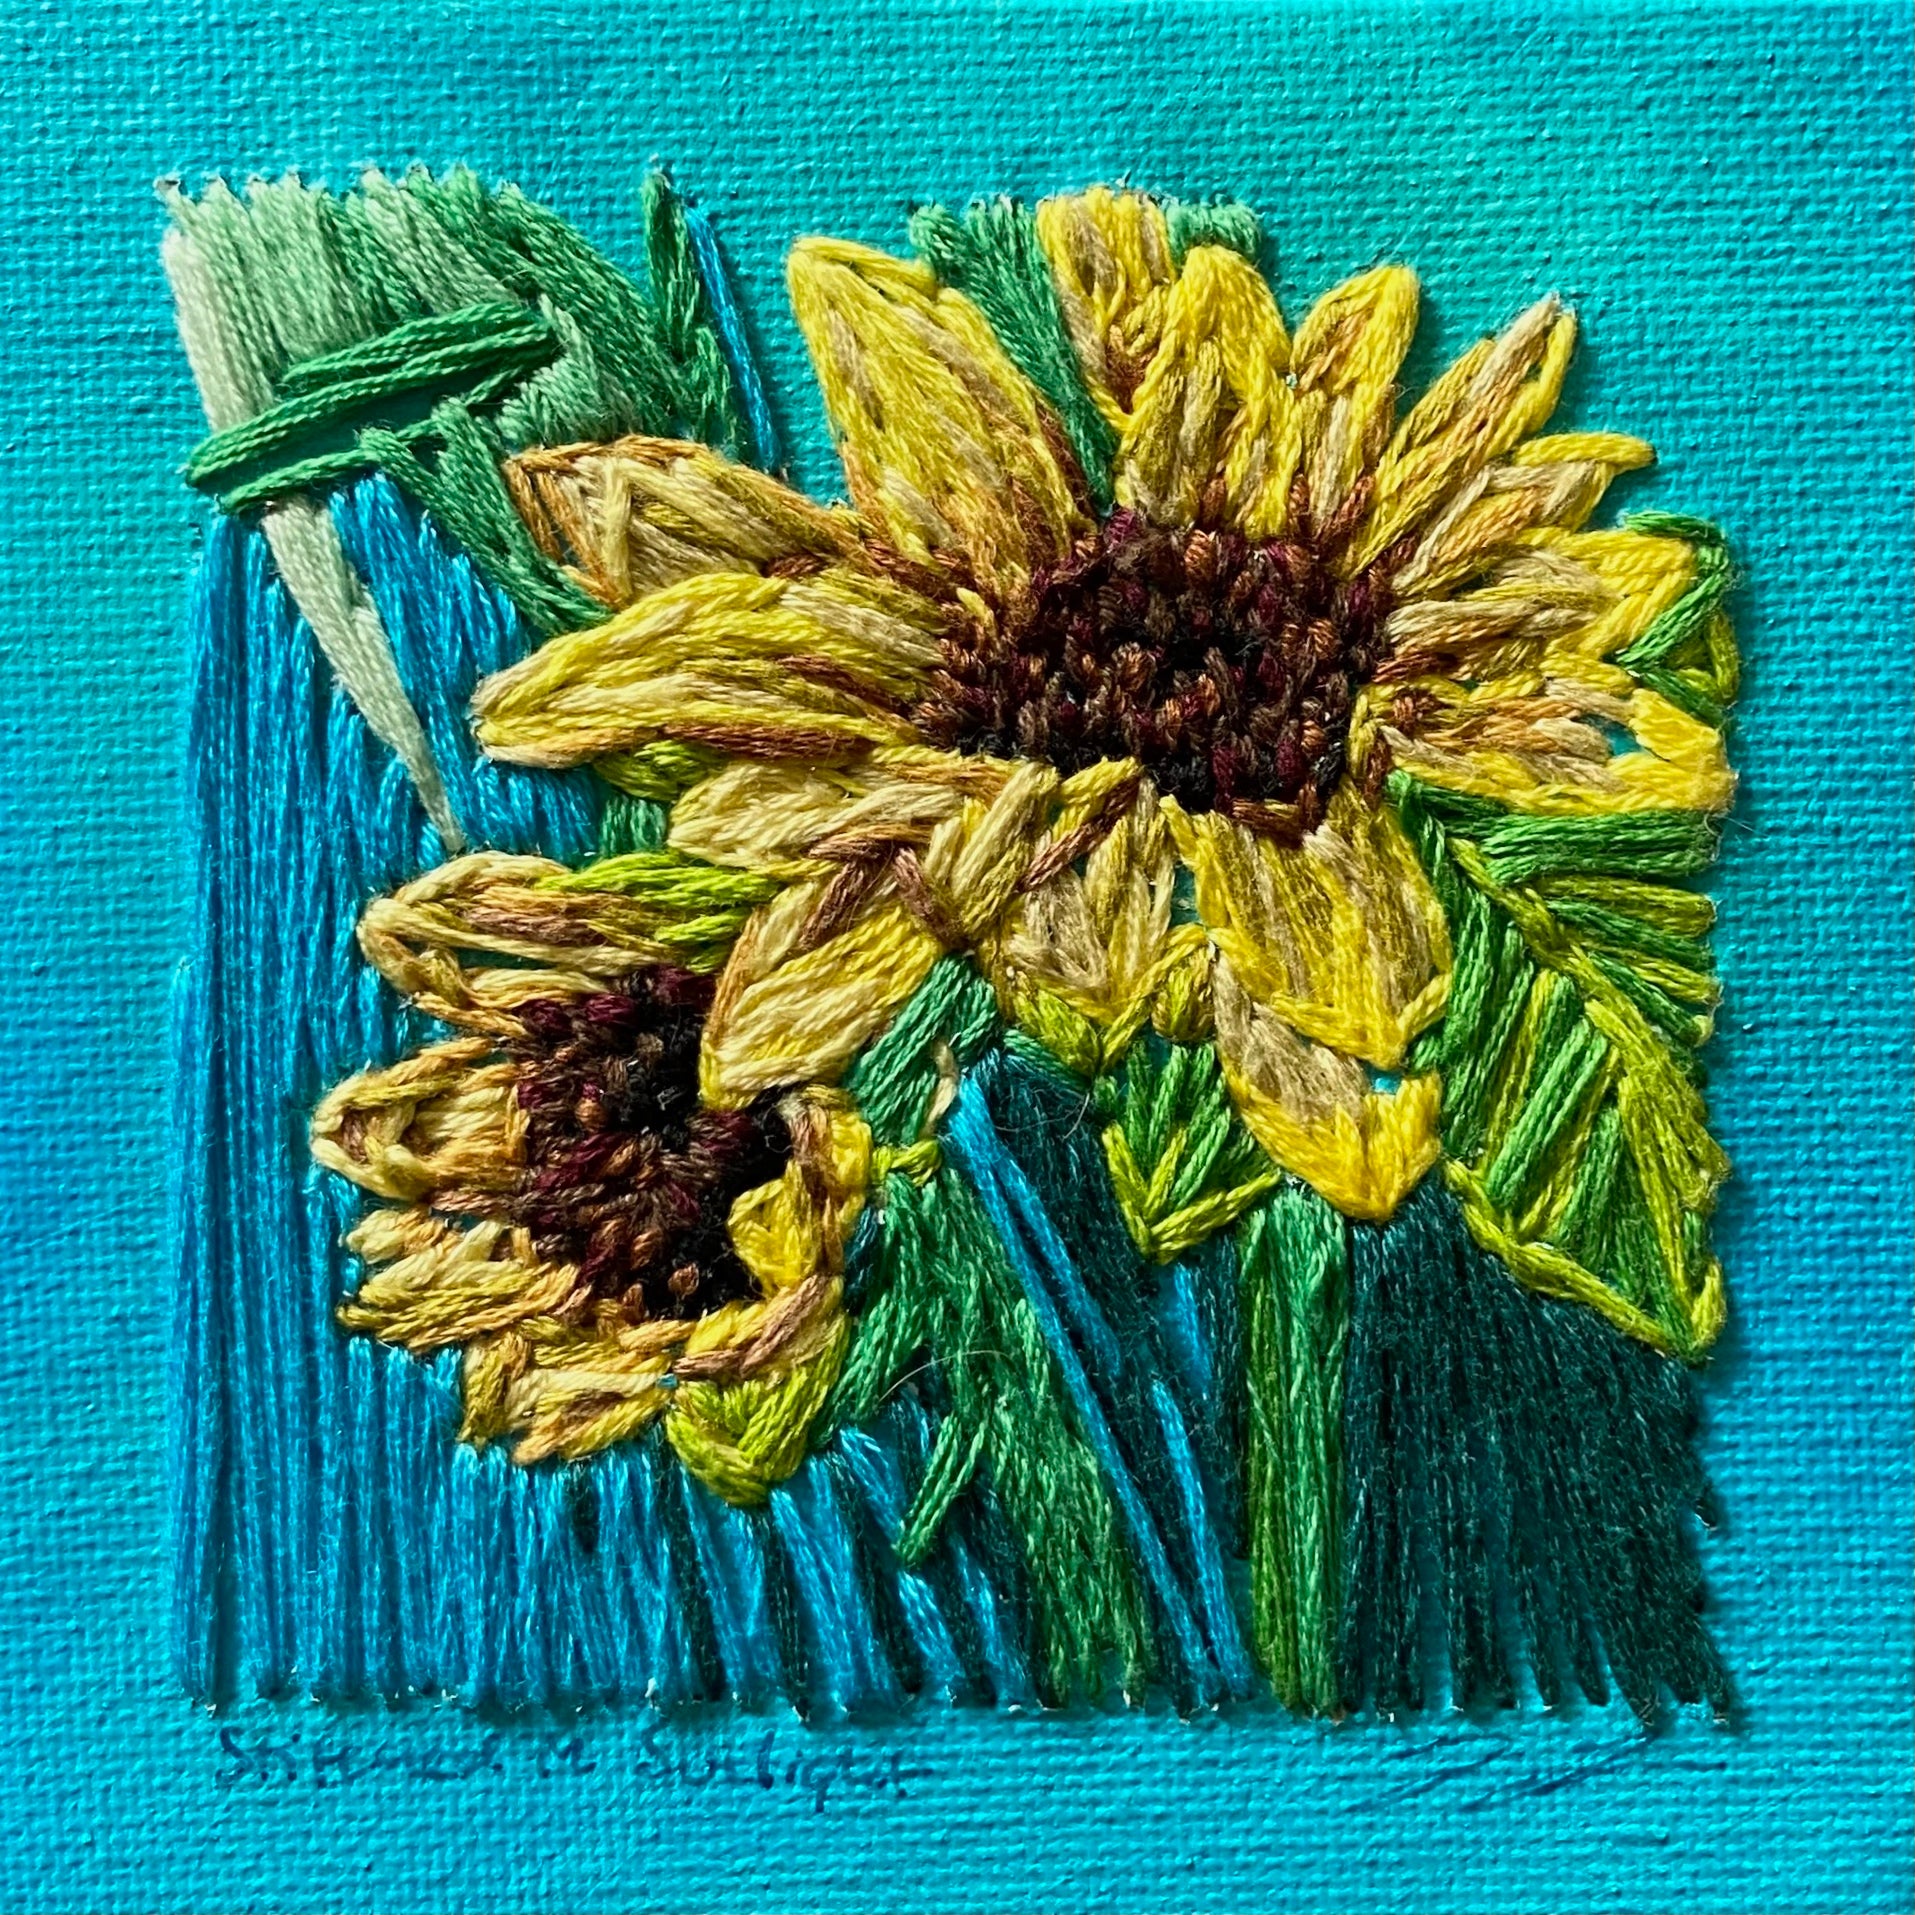 An embroidery on canvas piece of artwork, "Stitched in Sunlight", by artist Jackie Hanson. Two yellow sunflowers over a vibrant turquoise background.